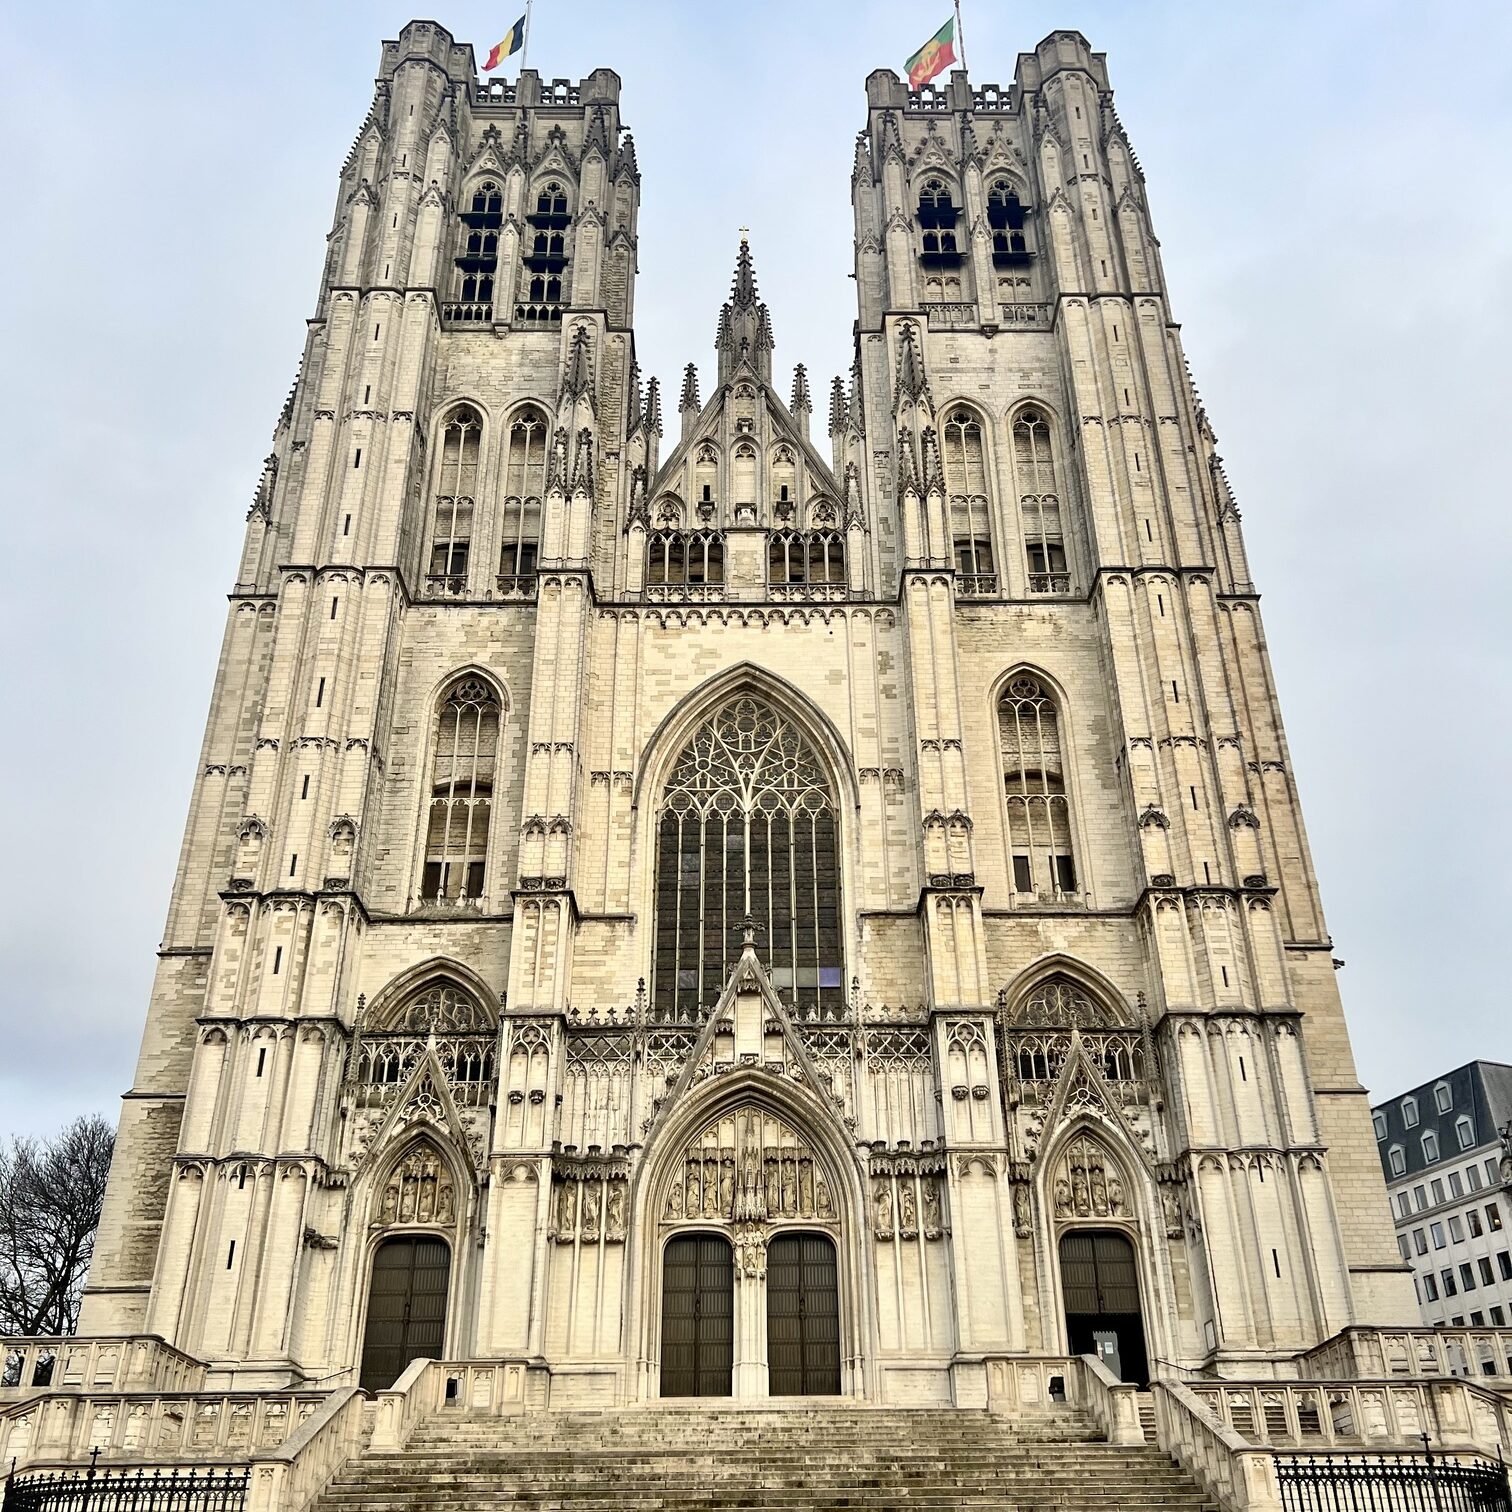 Enchanting view in Brussels, Belgium, with ornate medieval architecture and bustling activity, capturing the essence of Belgian heritage and culture